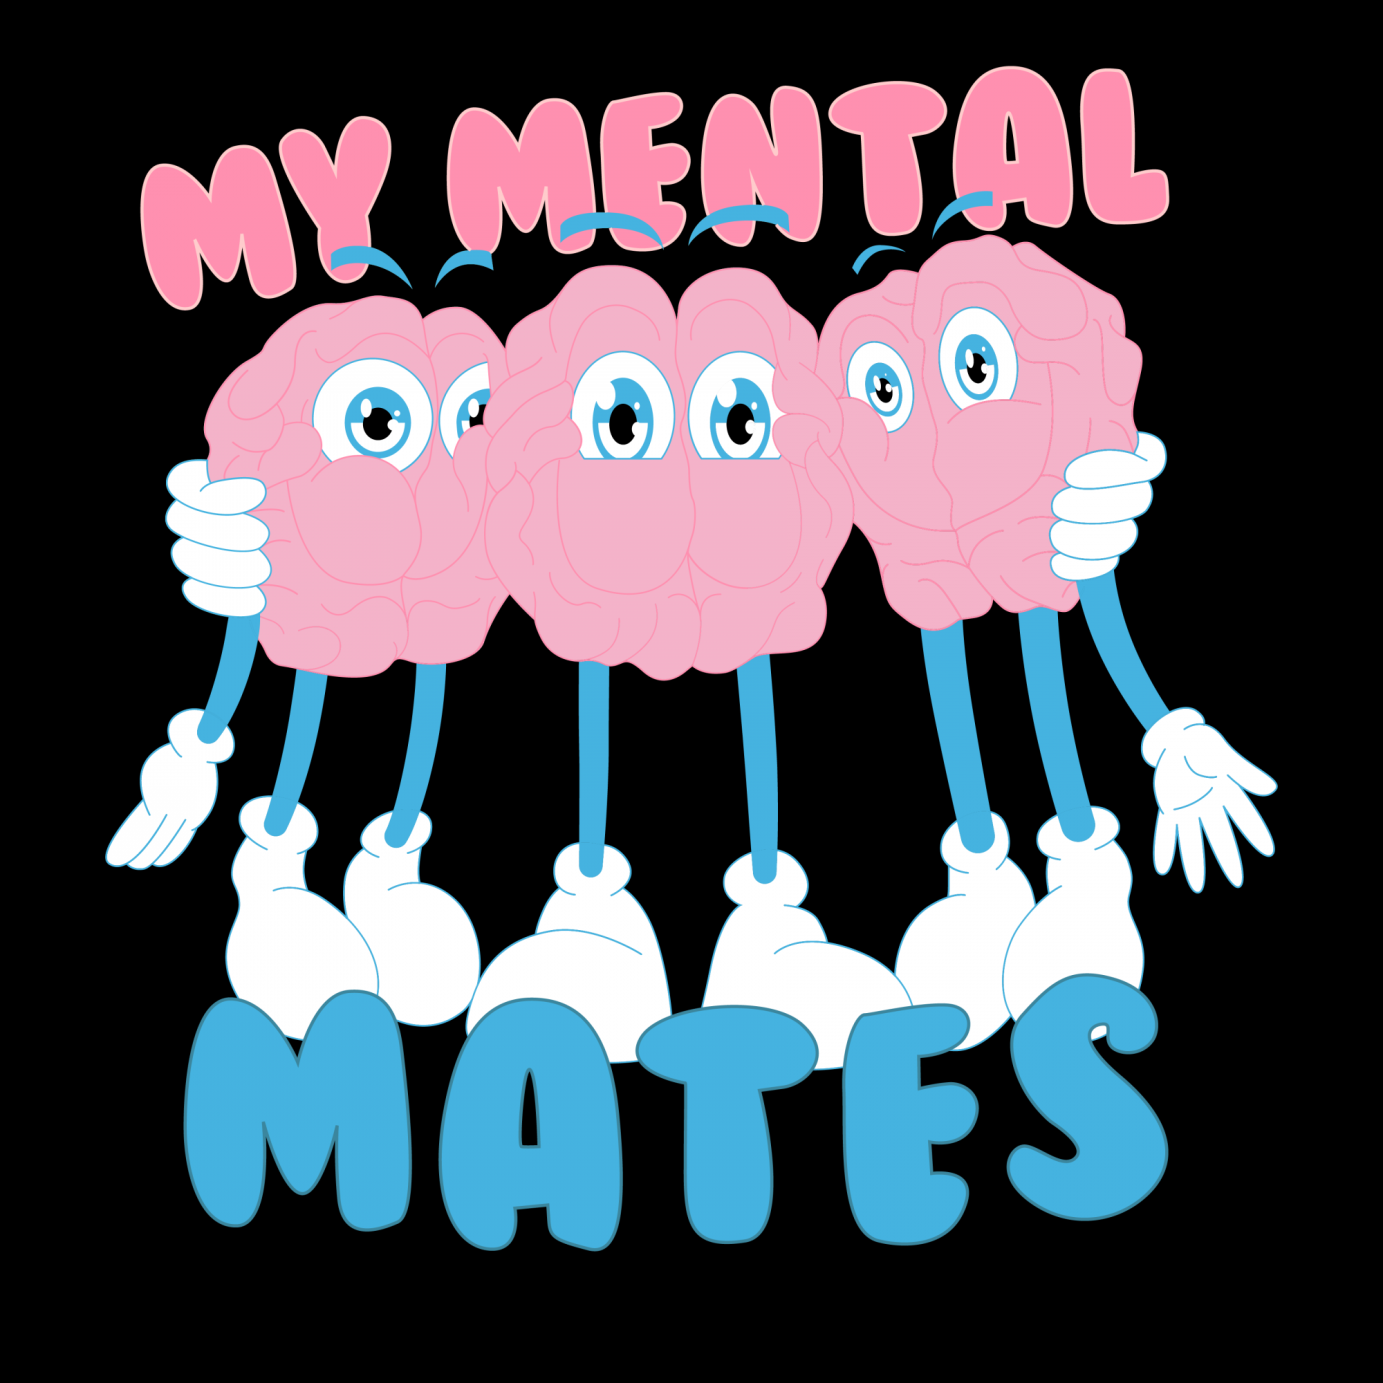 Artwork and Social Media for Podcast 'My Mental Mates'